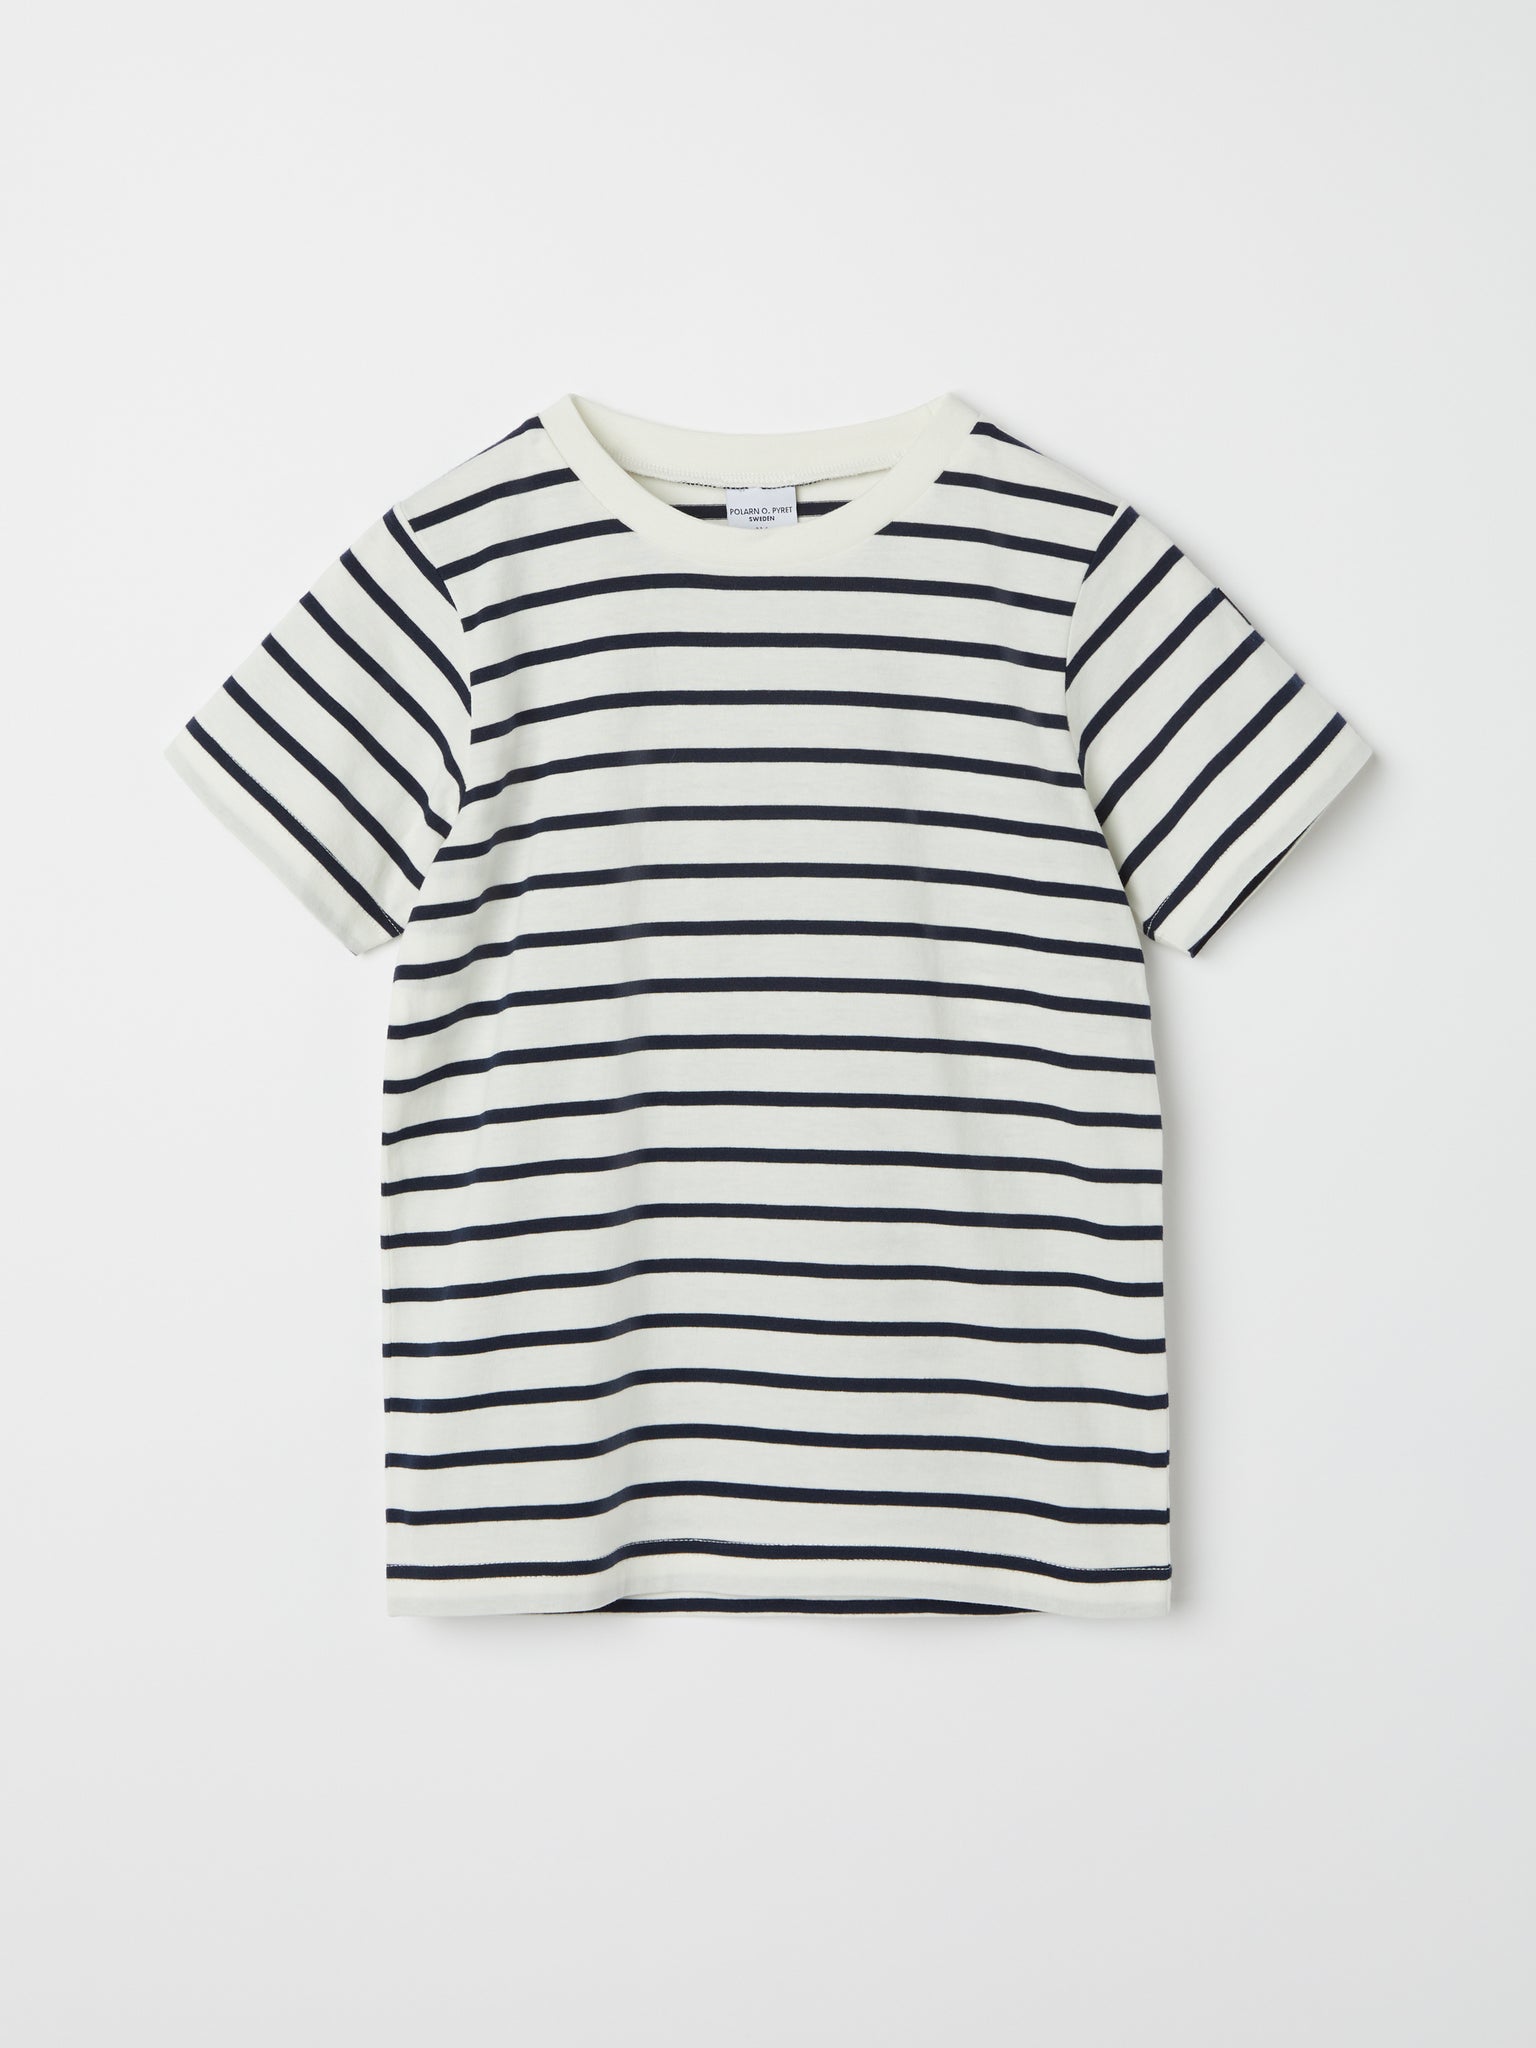 Navy Breton Stripe Kids T-Shirt from the Polarn O. Pyret kidswear collection. Clothes made using sustainably sourced materials.